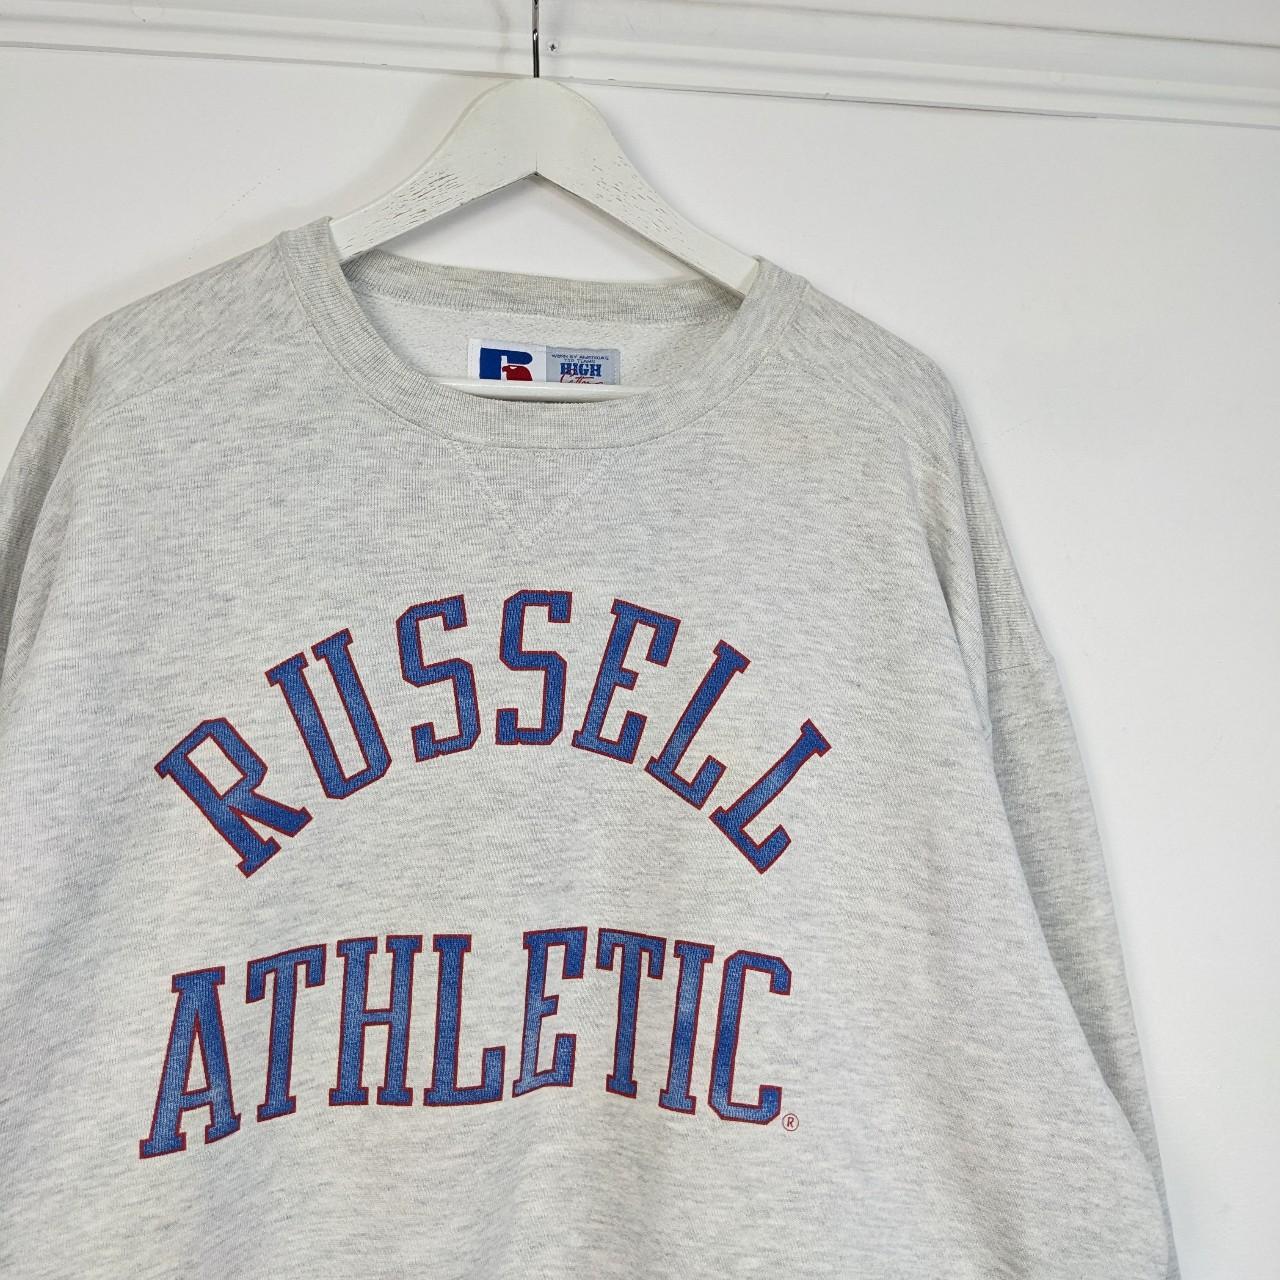 Vintage 90s Made in USA Russell Athletic High Cotton - Depop